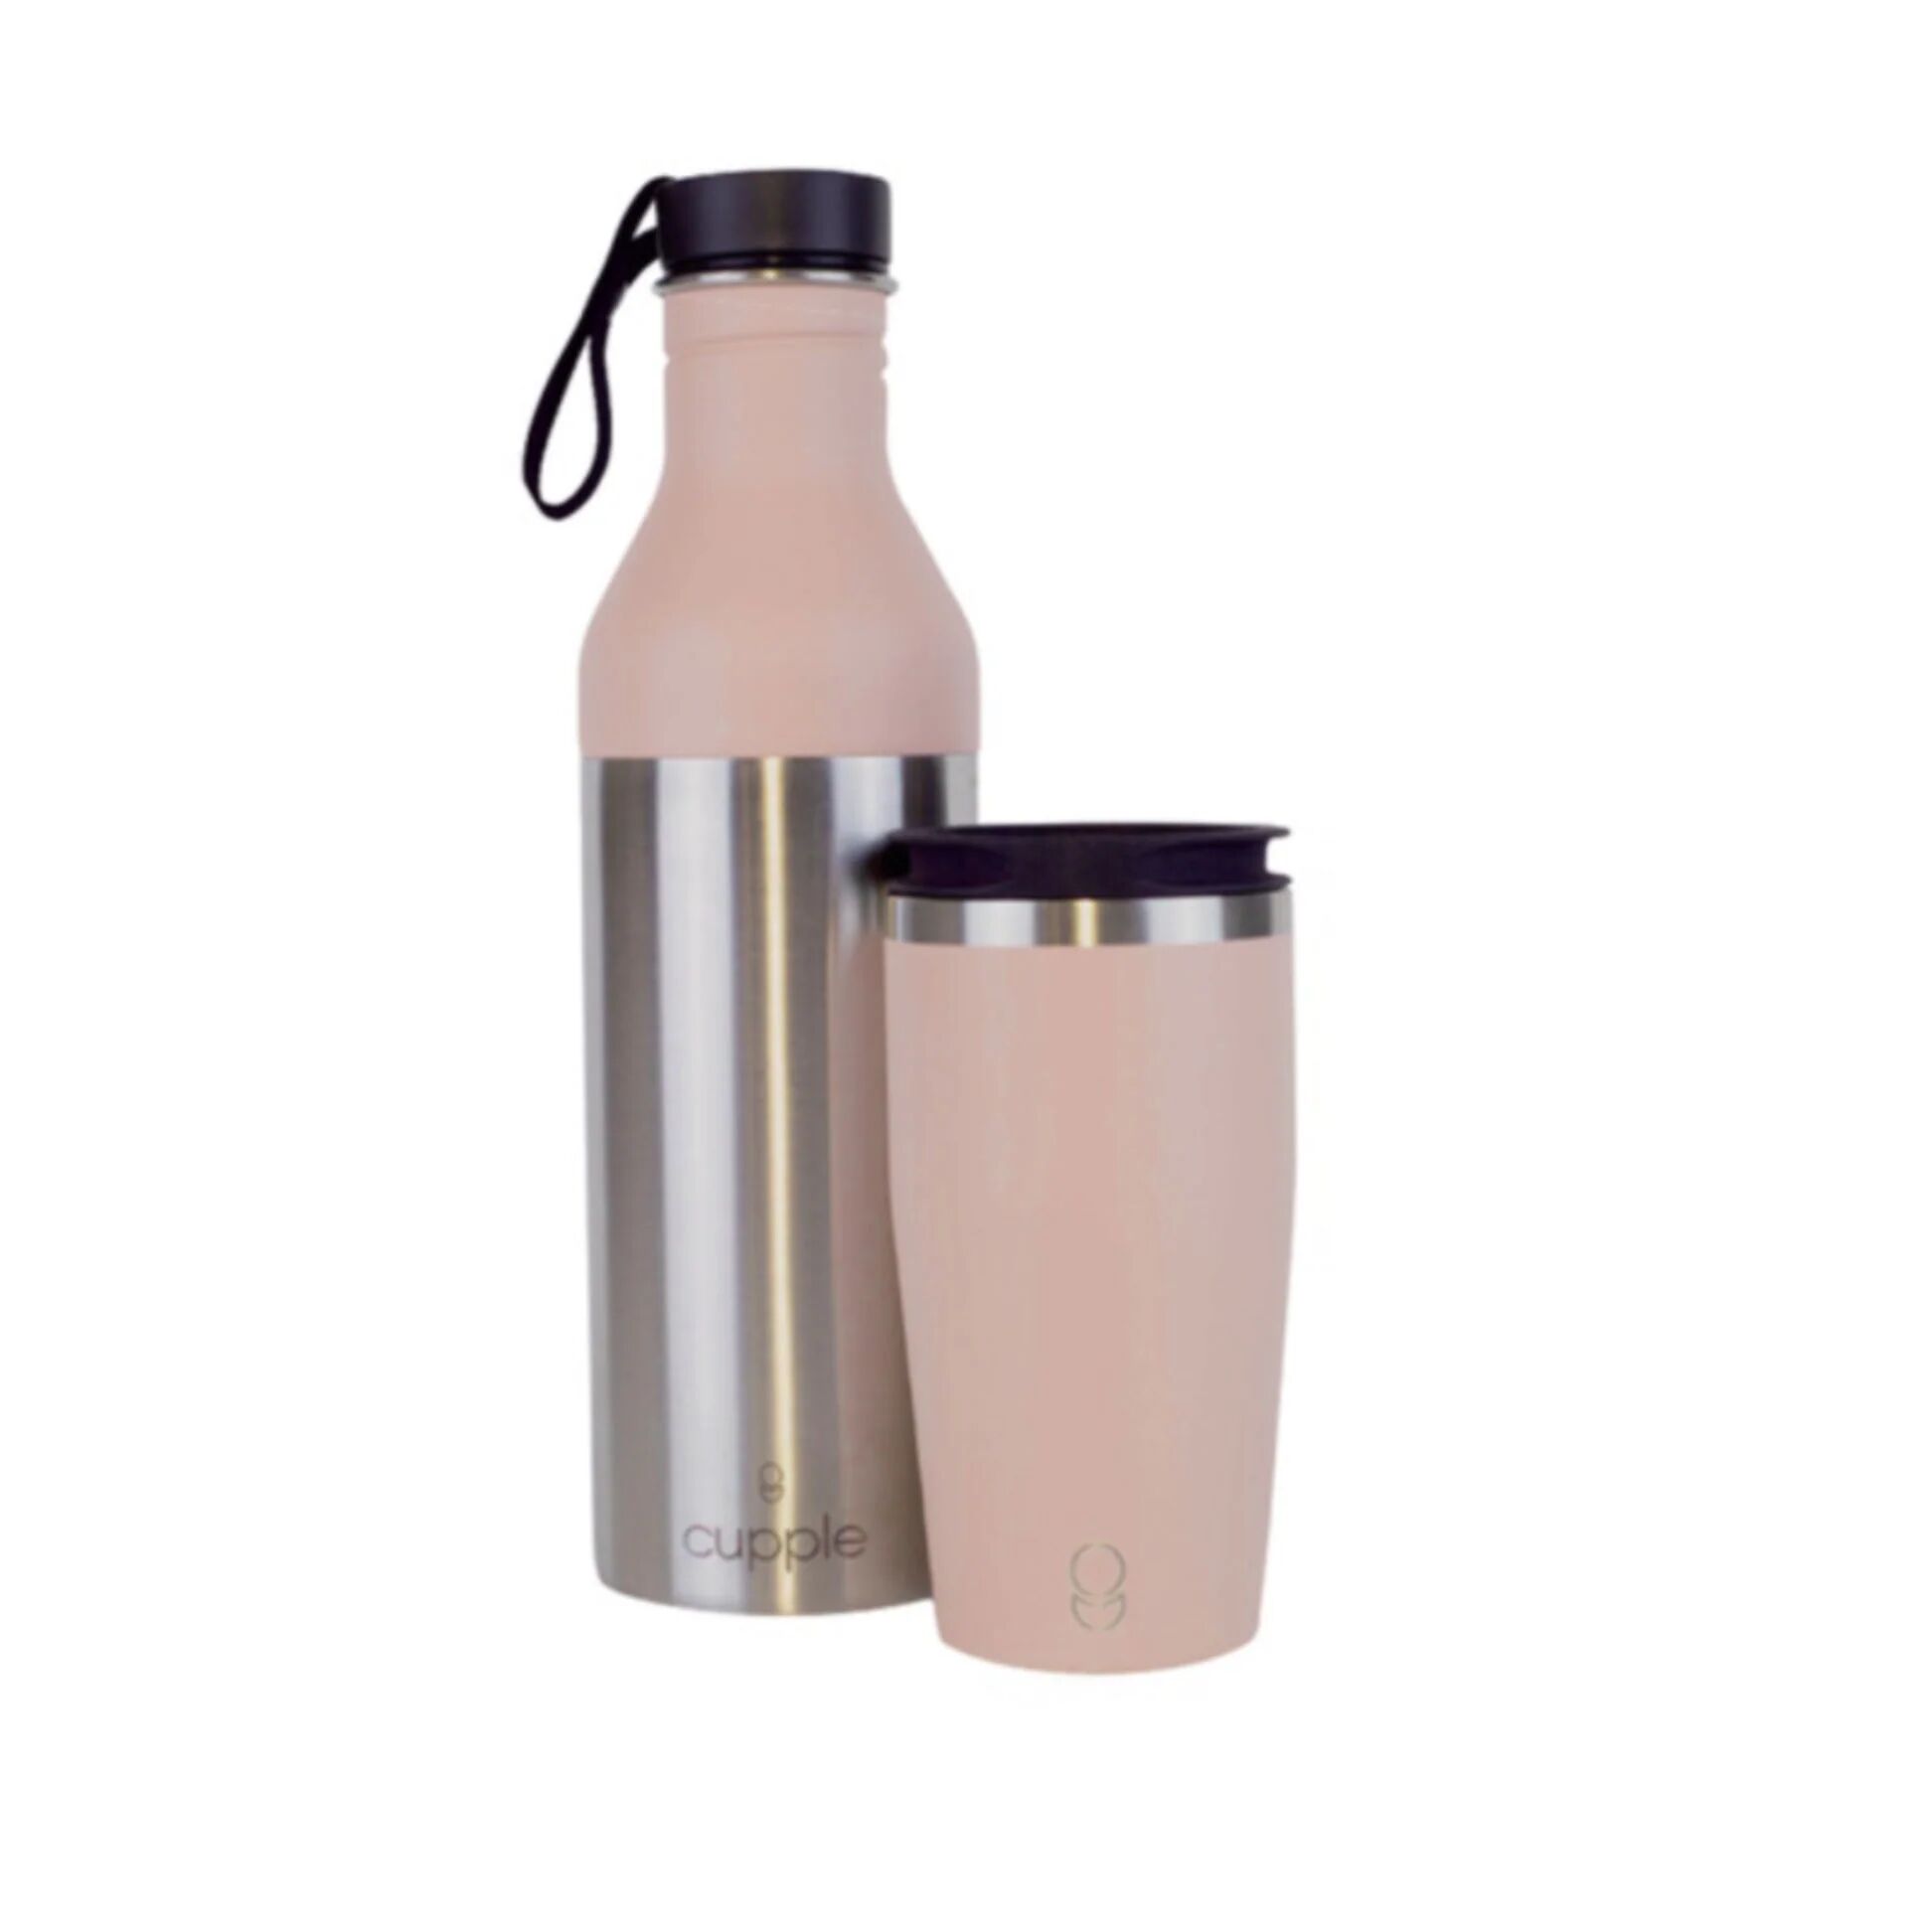 Water Bottle & Coffee Cup, Blush Pink By Cupple   Colour: Blush Pink